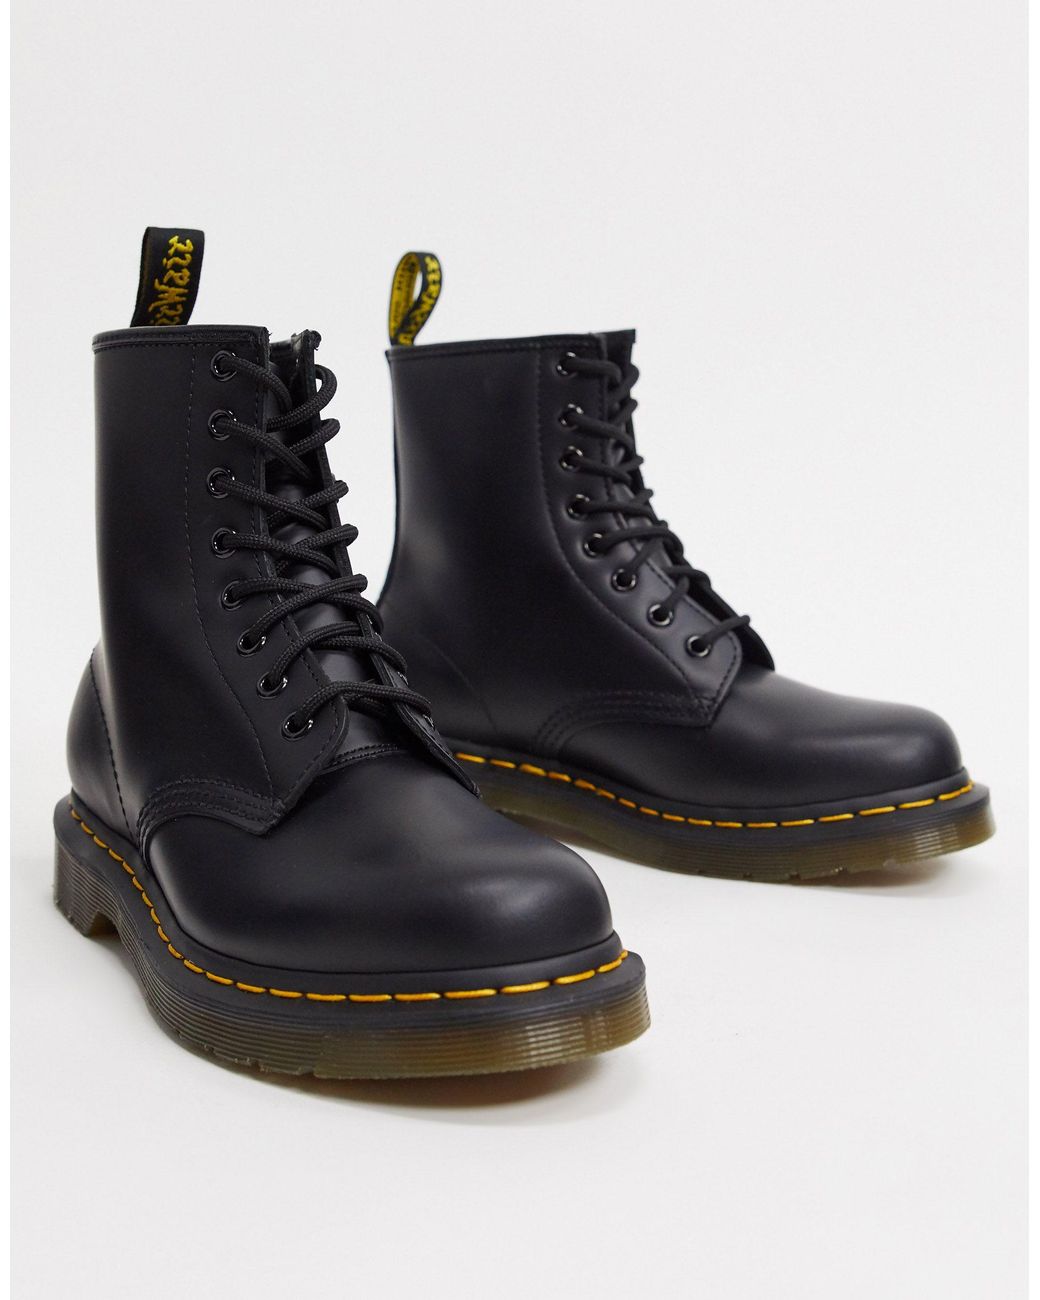 Dr. Martens Modern Classics Smooth 1460 8-eye Boots in Black - Lyst